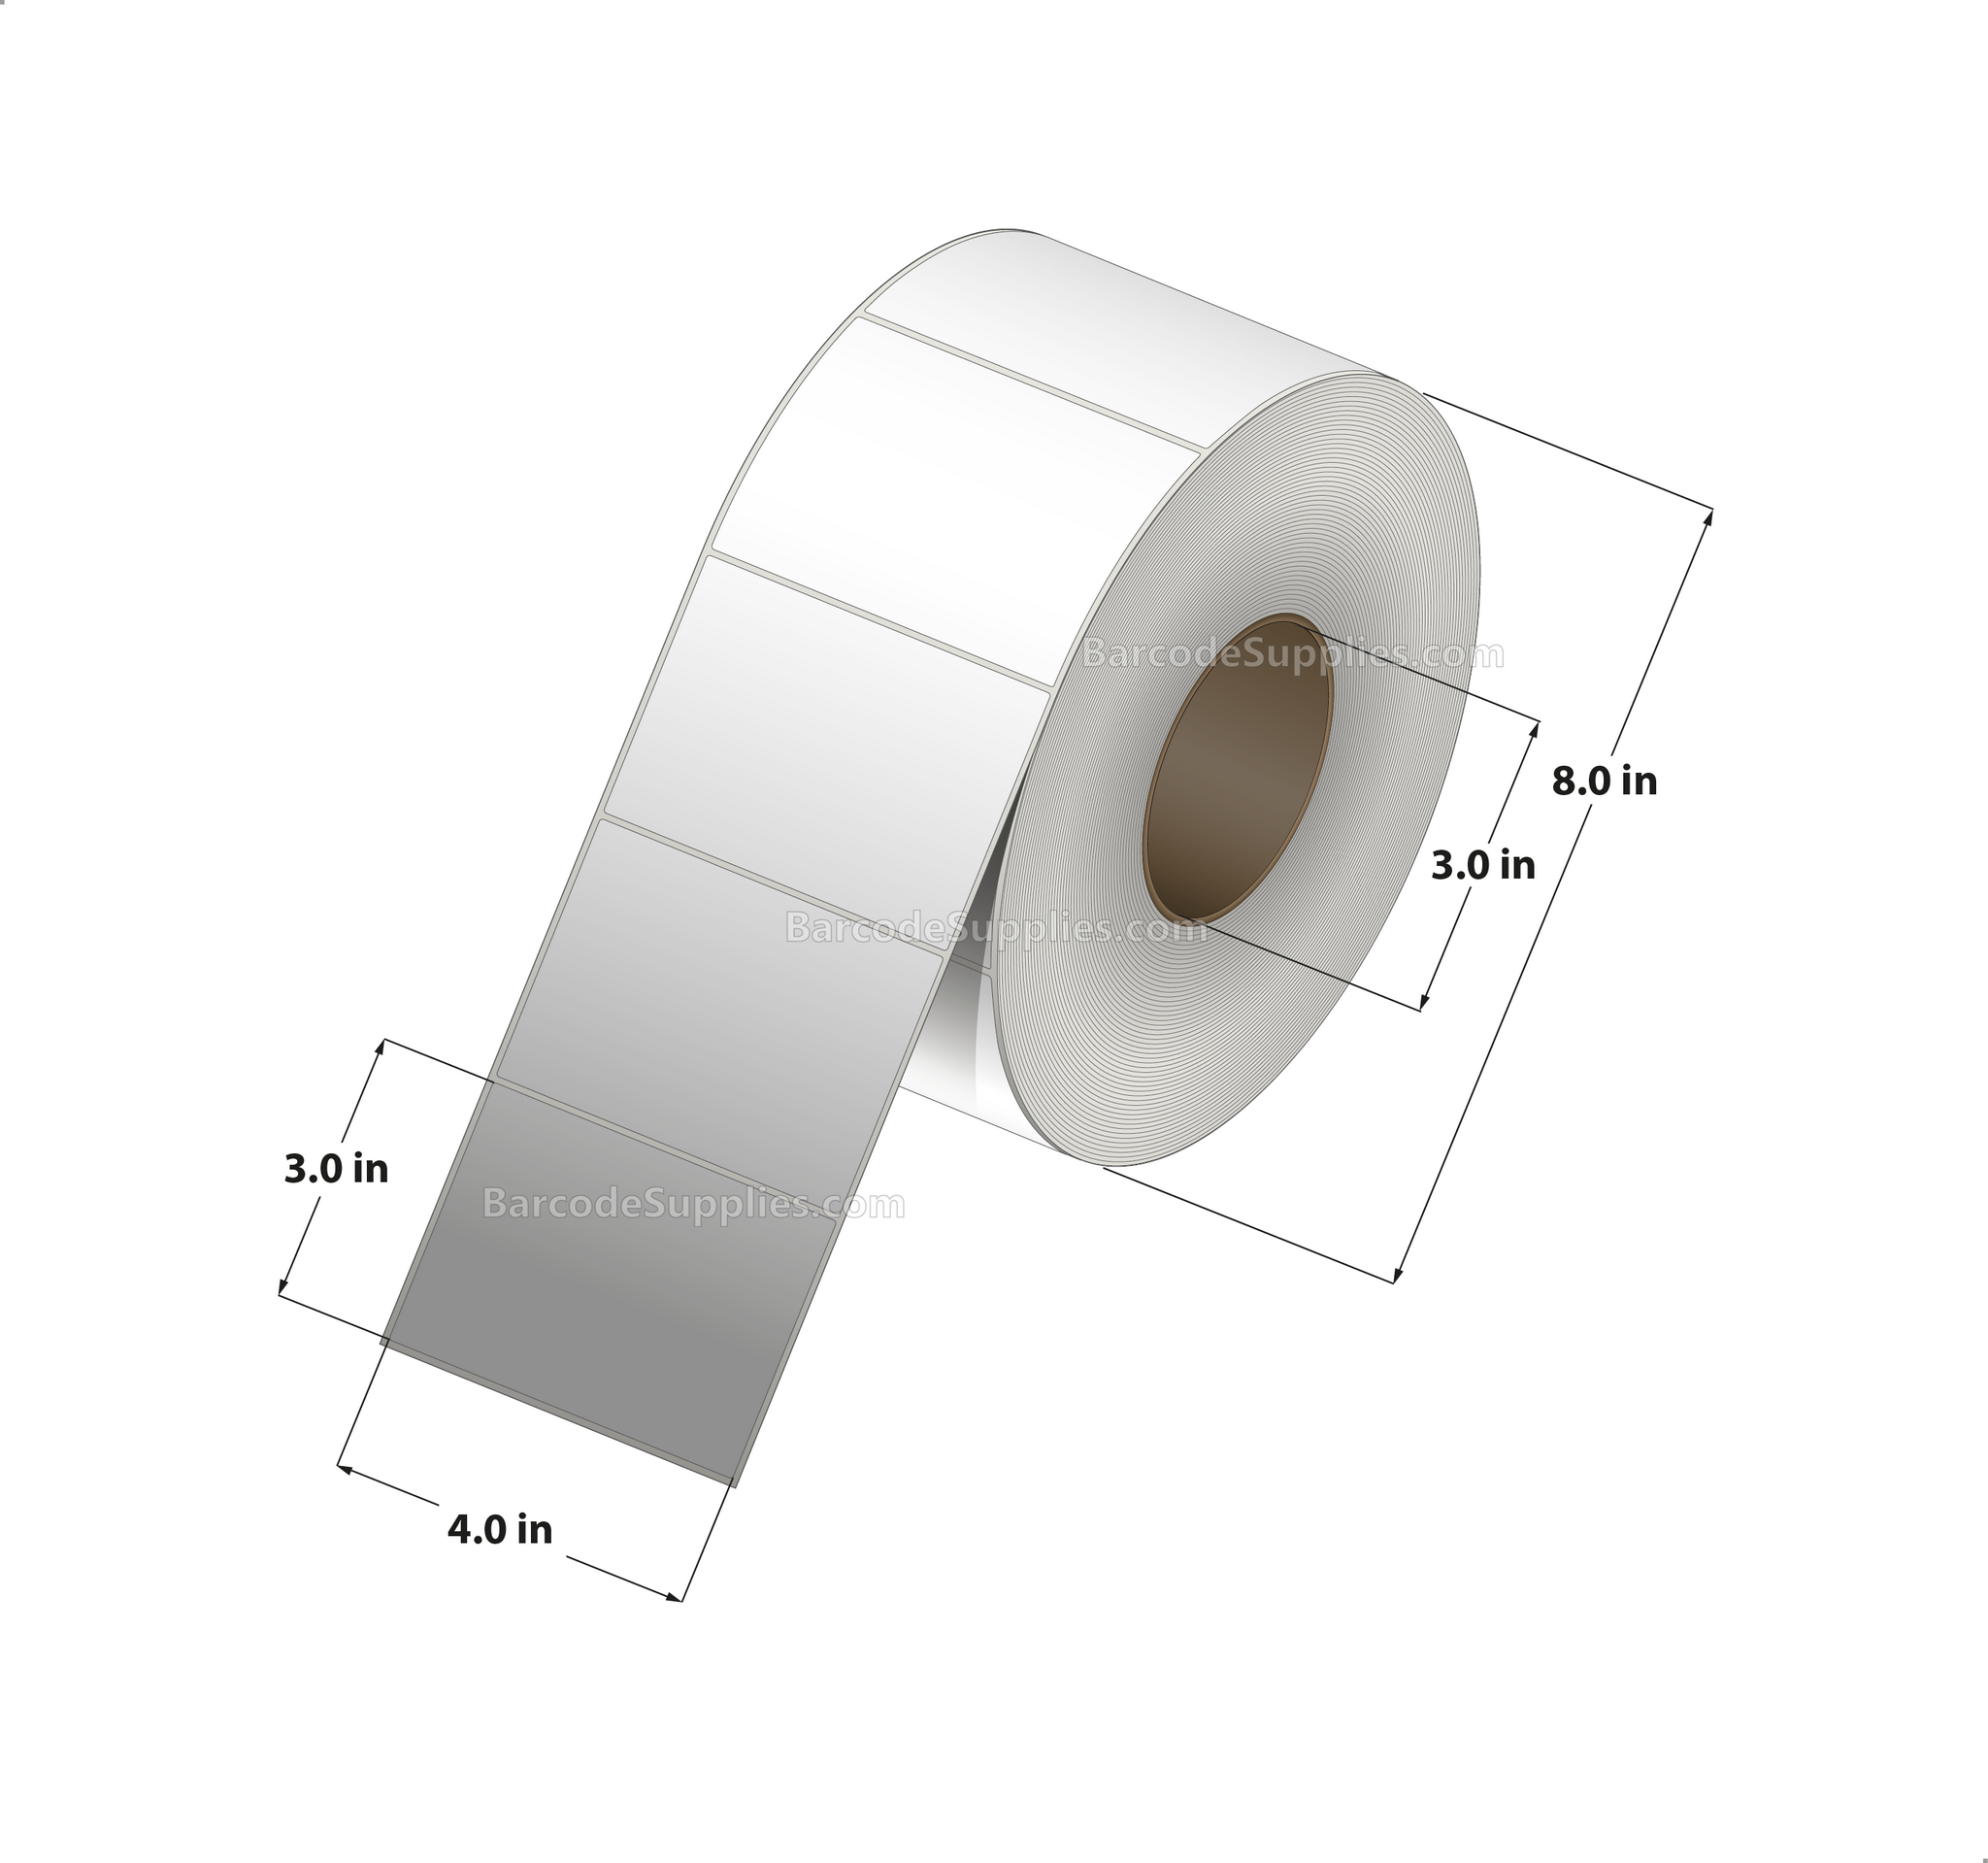 4 x 3 Direct Thermal White Labels With Rubber Adhesive - No Perforation - 2000 Labels Per Roll - Carton Of 4 Rolls - 8000 Labels Total - MPN: DT400300-3